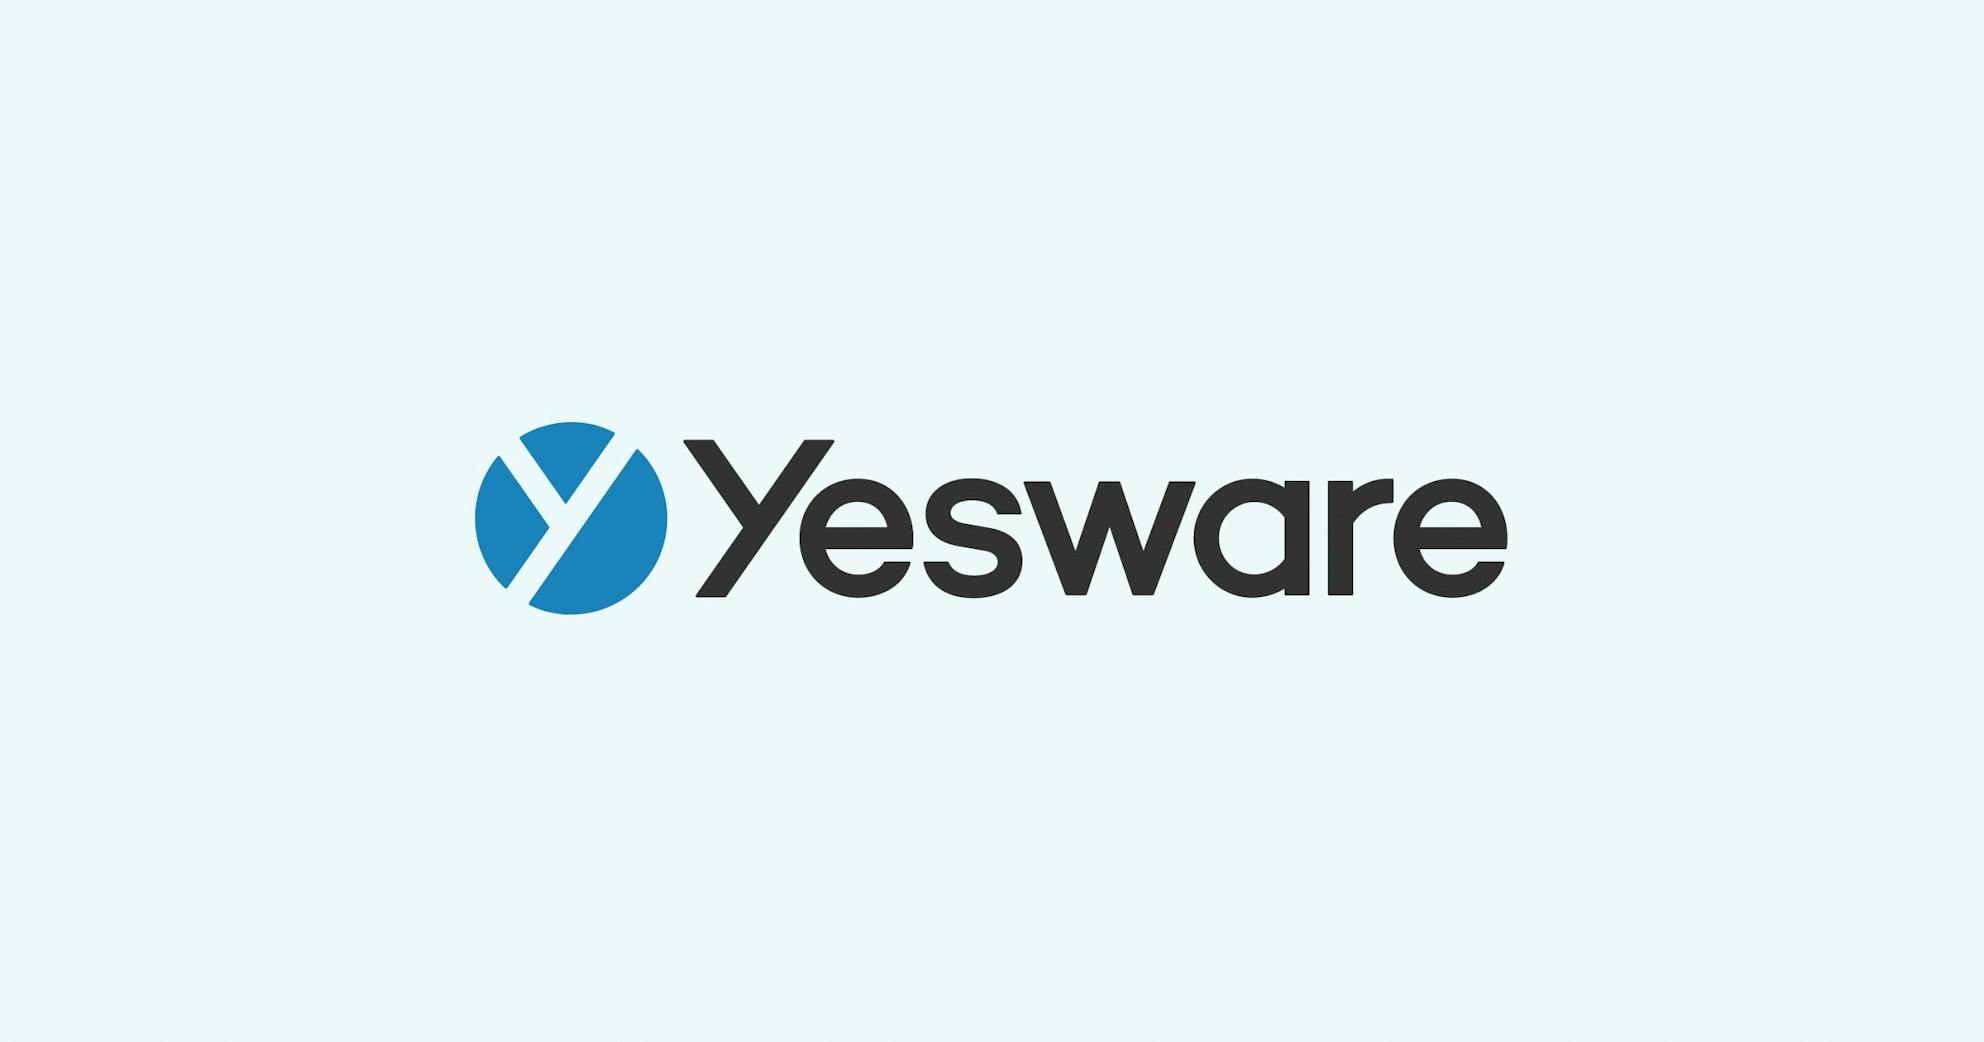 Yesware Celebrates 100,000 Users, Looks to the Future